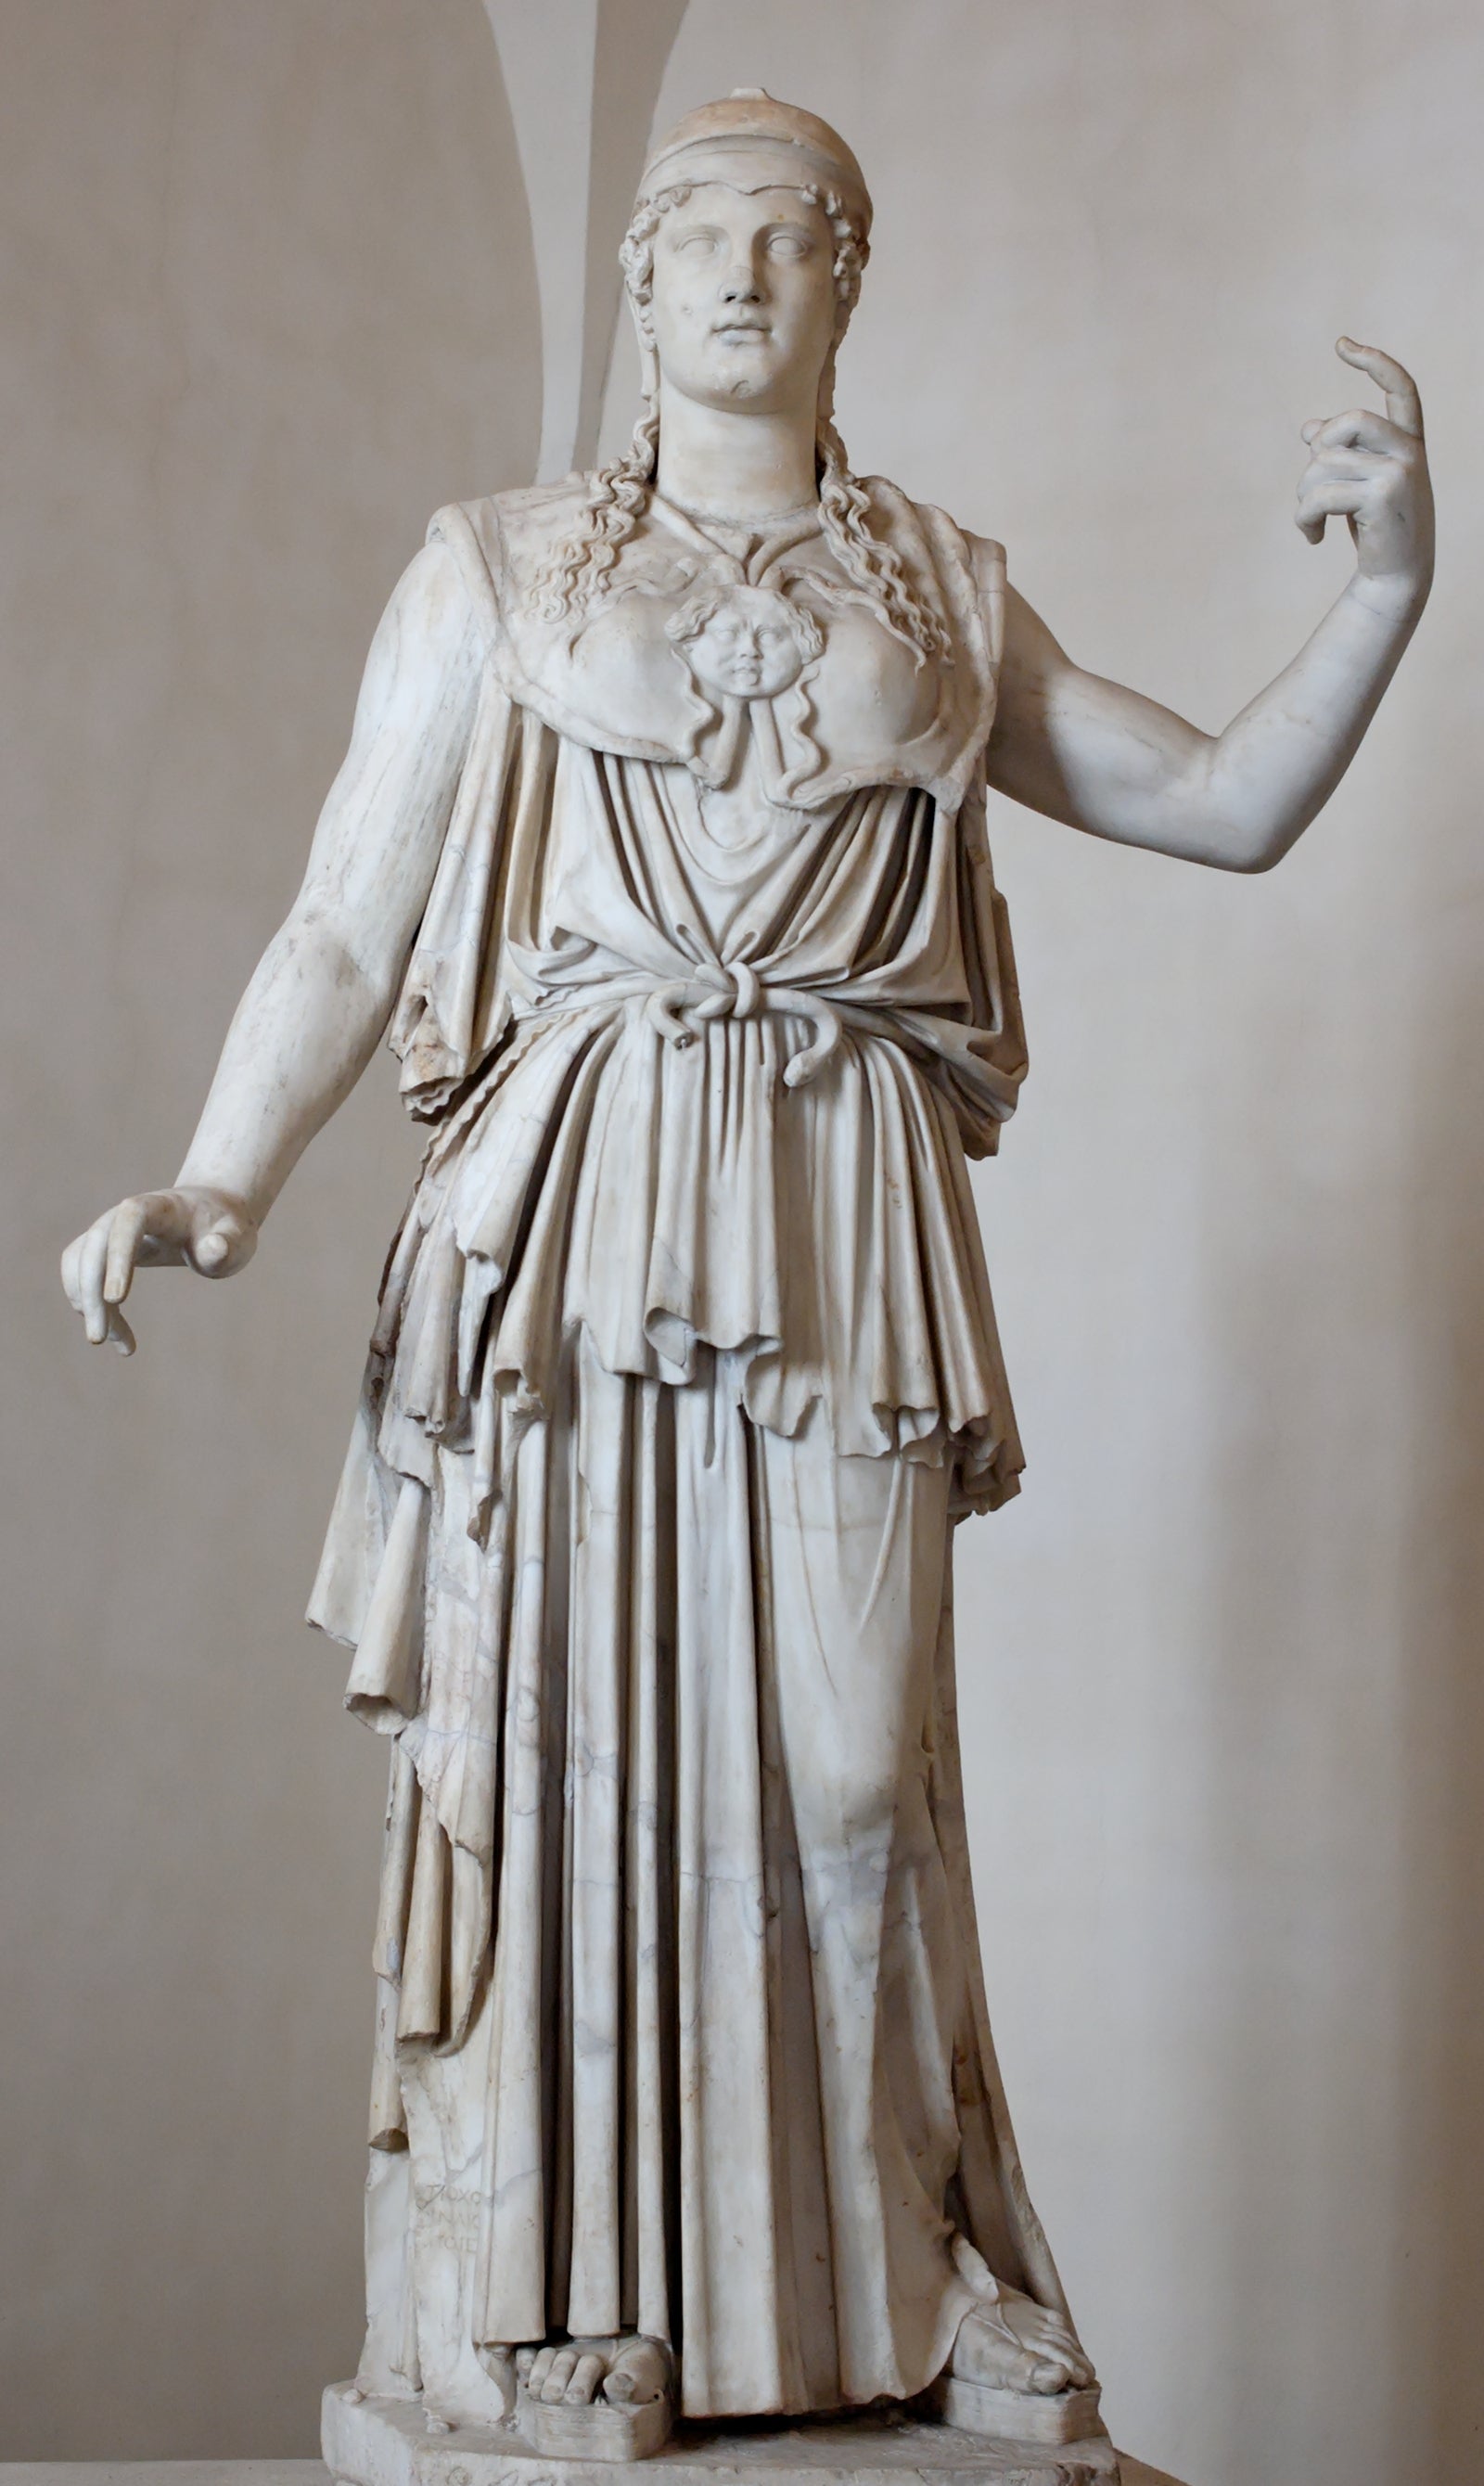 A classical era marble sculpture of the Goddess Athena, a woman in a long, draping dress with a warrior's breastplate